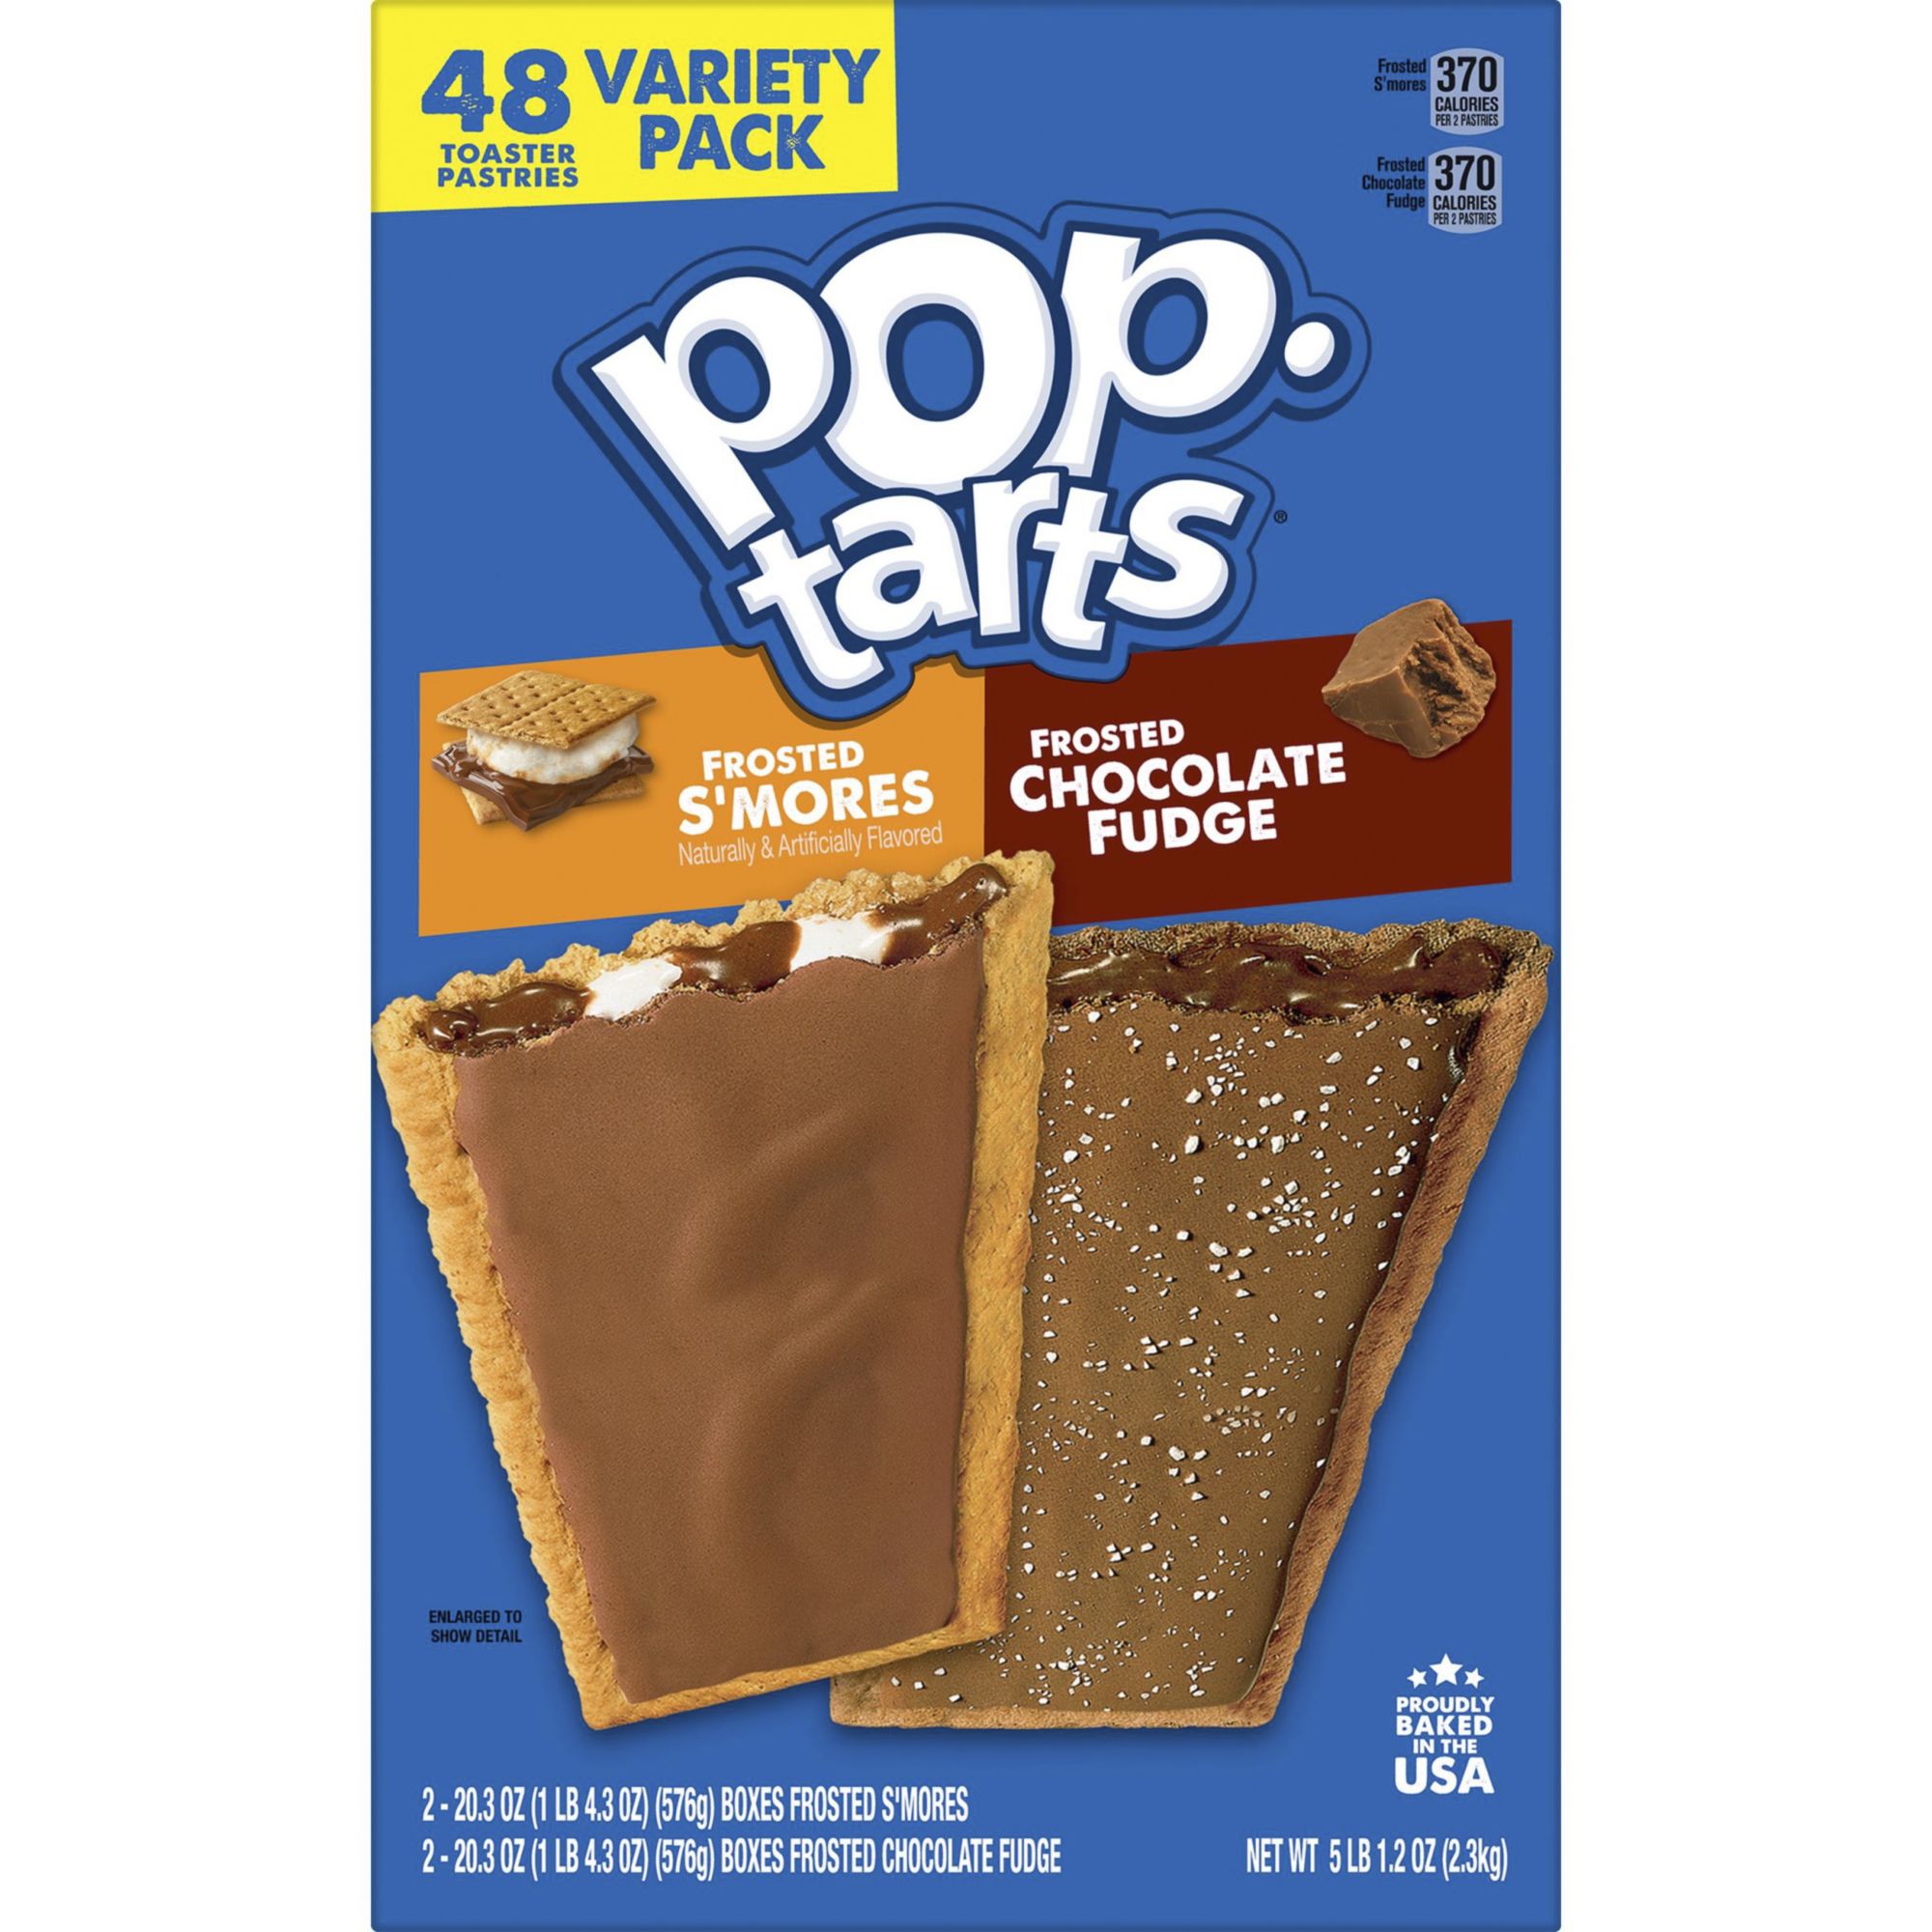 Kellogg's Pop-Tarts Frosted S'Mores 16Ct Box